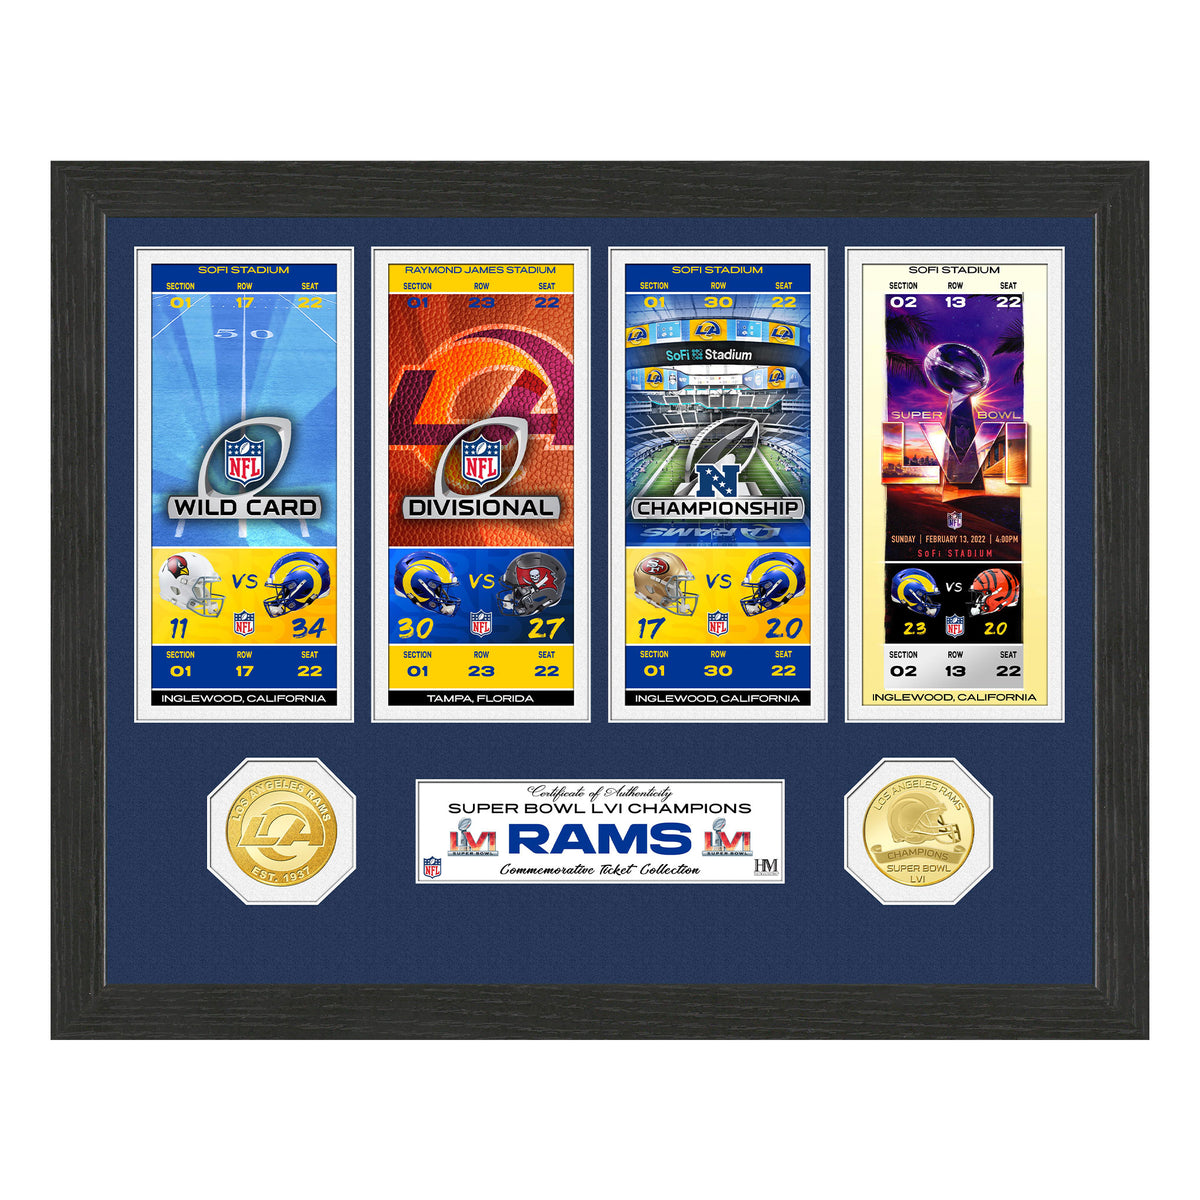 Los Angeles Rams Super Bowl Championship Ticket Collection